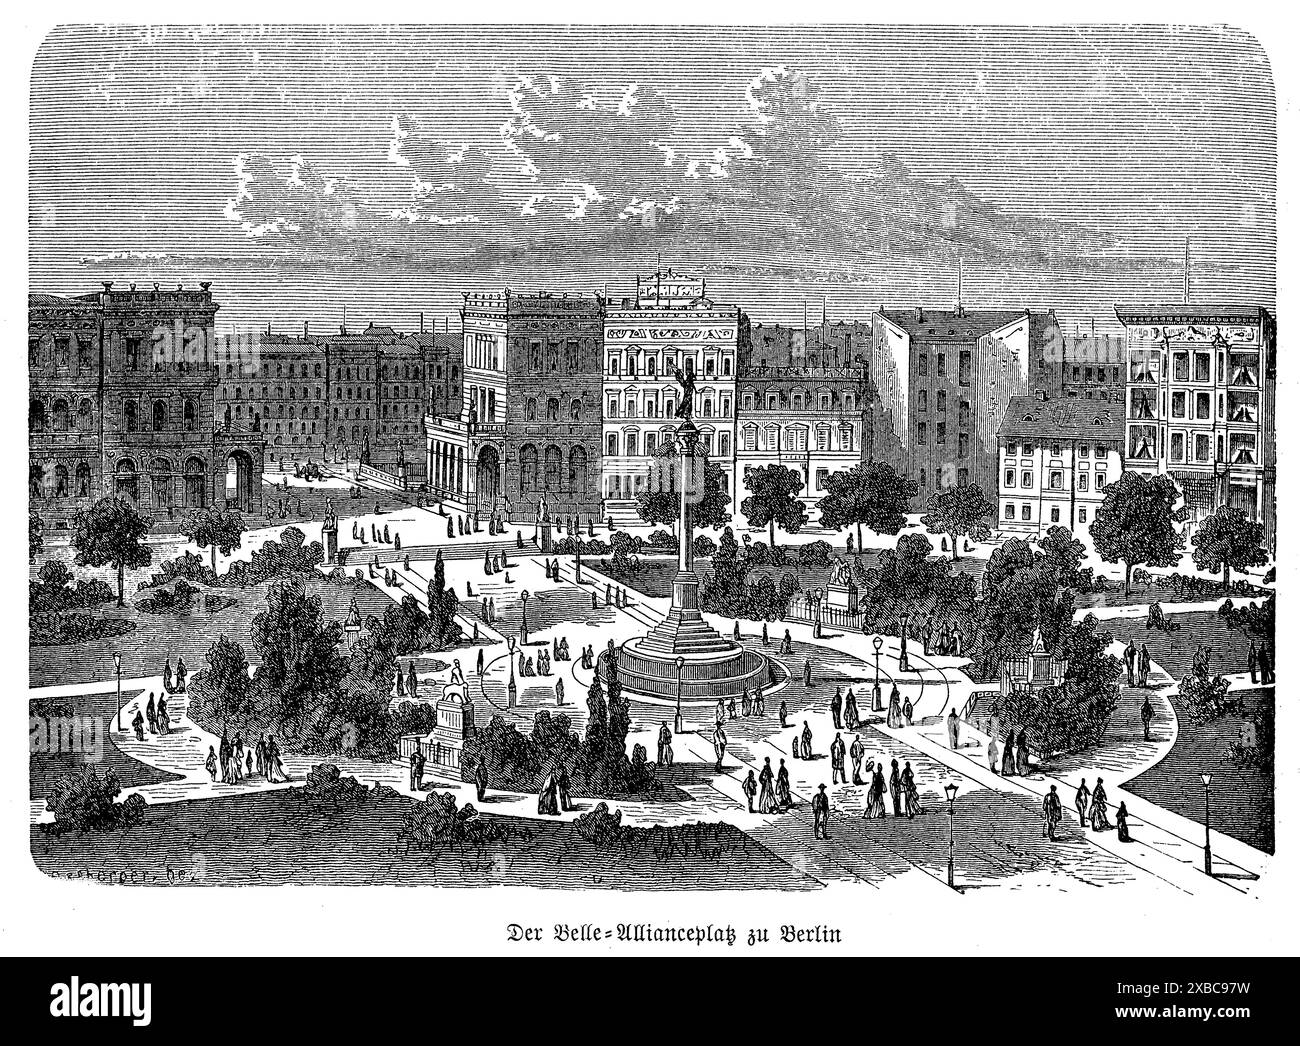 This detailed 19th-century black and white engraving captures Belle-Alliance-Platz in Berlin, a significant urban square named after the Battle of Belle Alliance. The artwork features the vibrant square, bustling with activity, surrounded by elegant buildings showcasing neoclassical and baroque architectural styles. Prominent in the scene are the statue and fountains that add to the square's grandeur. The intricate details of the engraving highlight the cultural and historical essence of Belle-Alliance-Platz, offering a glimpse into the urban life and architectural beauty of Berlin during the Stock Photo